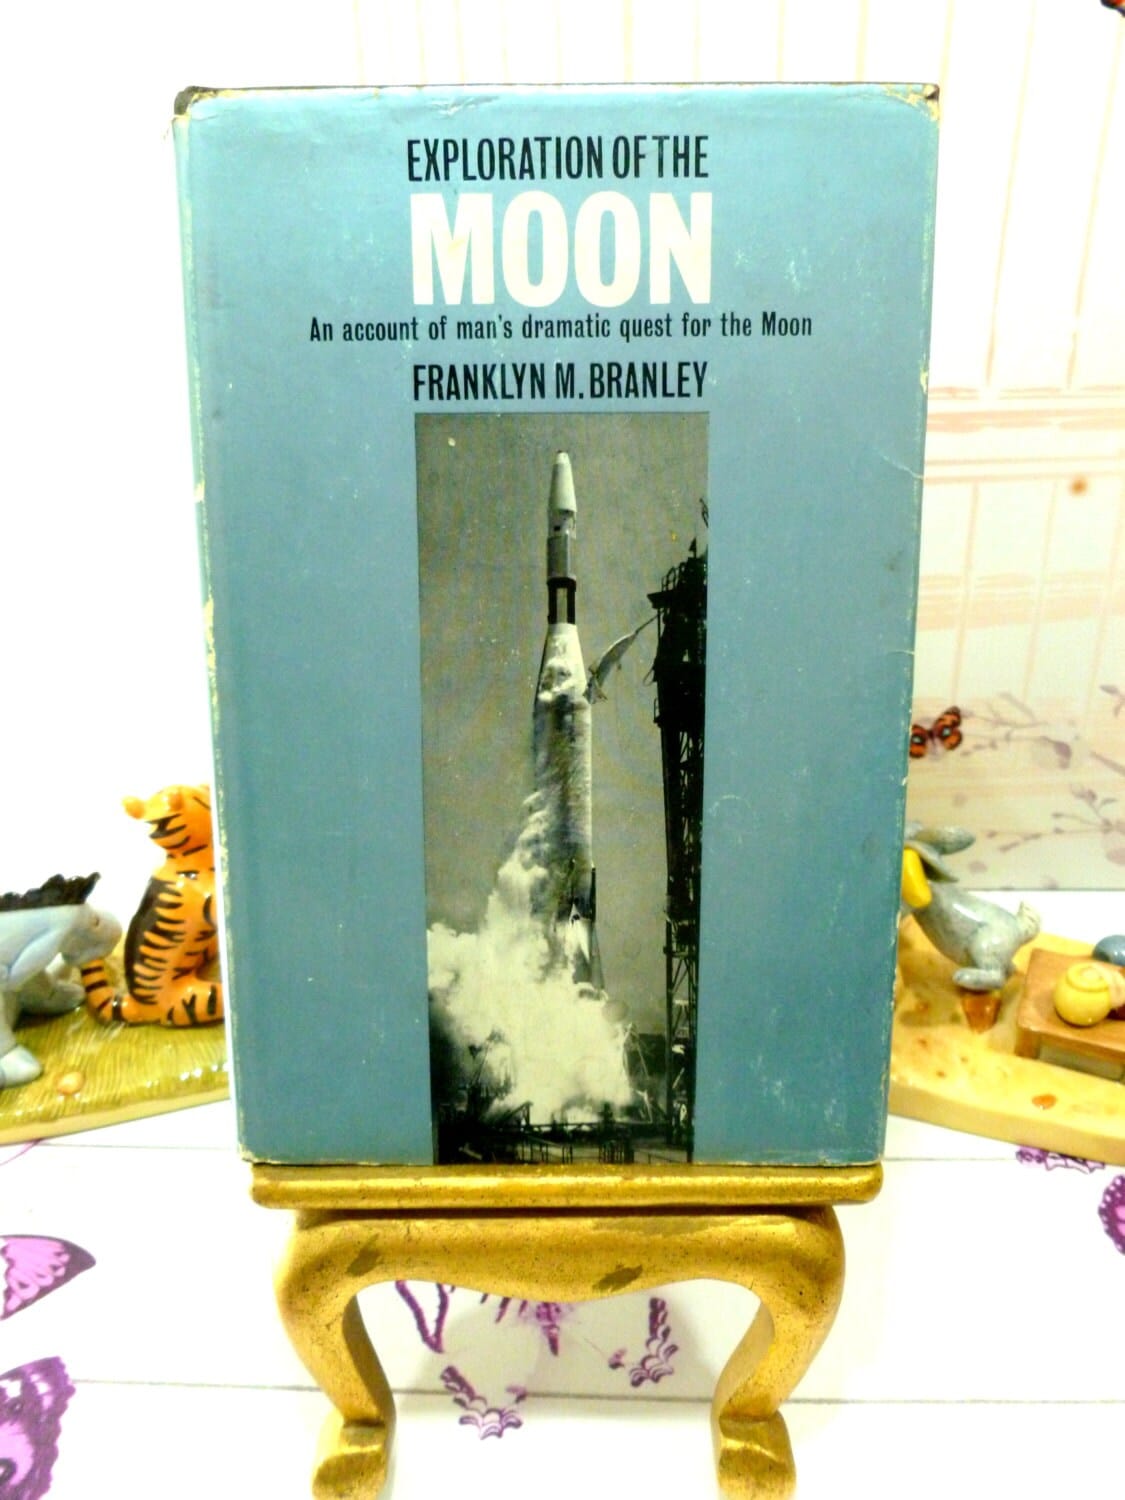 Front cover of vintage book Exploration of the Moon showing a rocket launch against a metallic blue ground. 